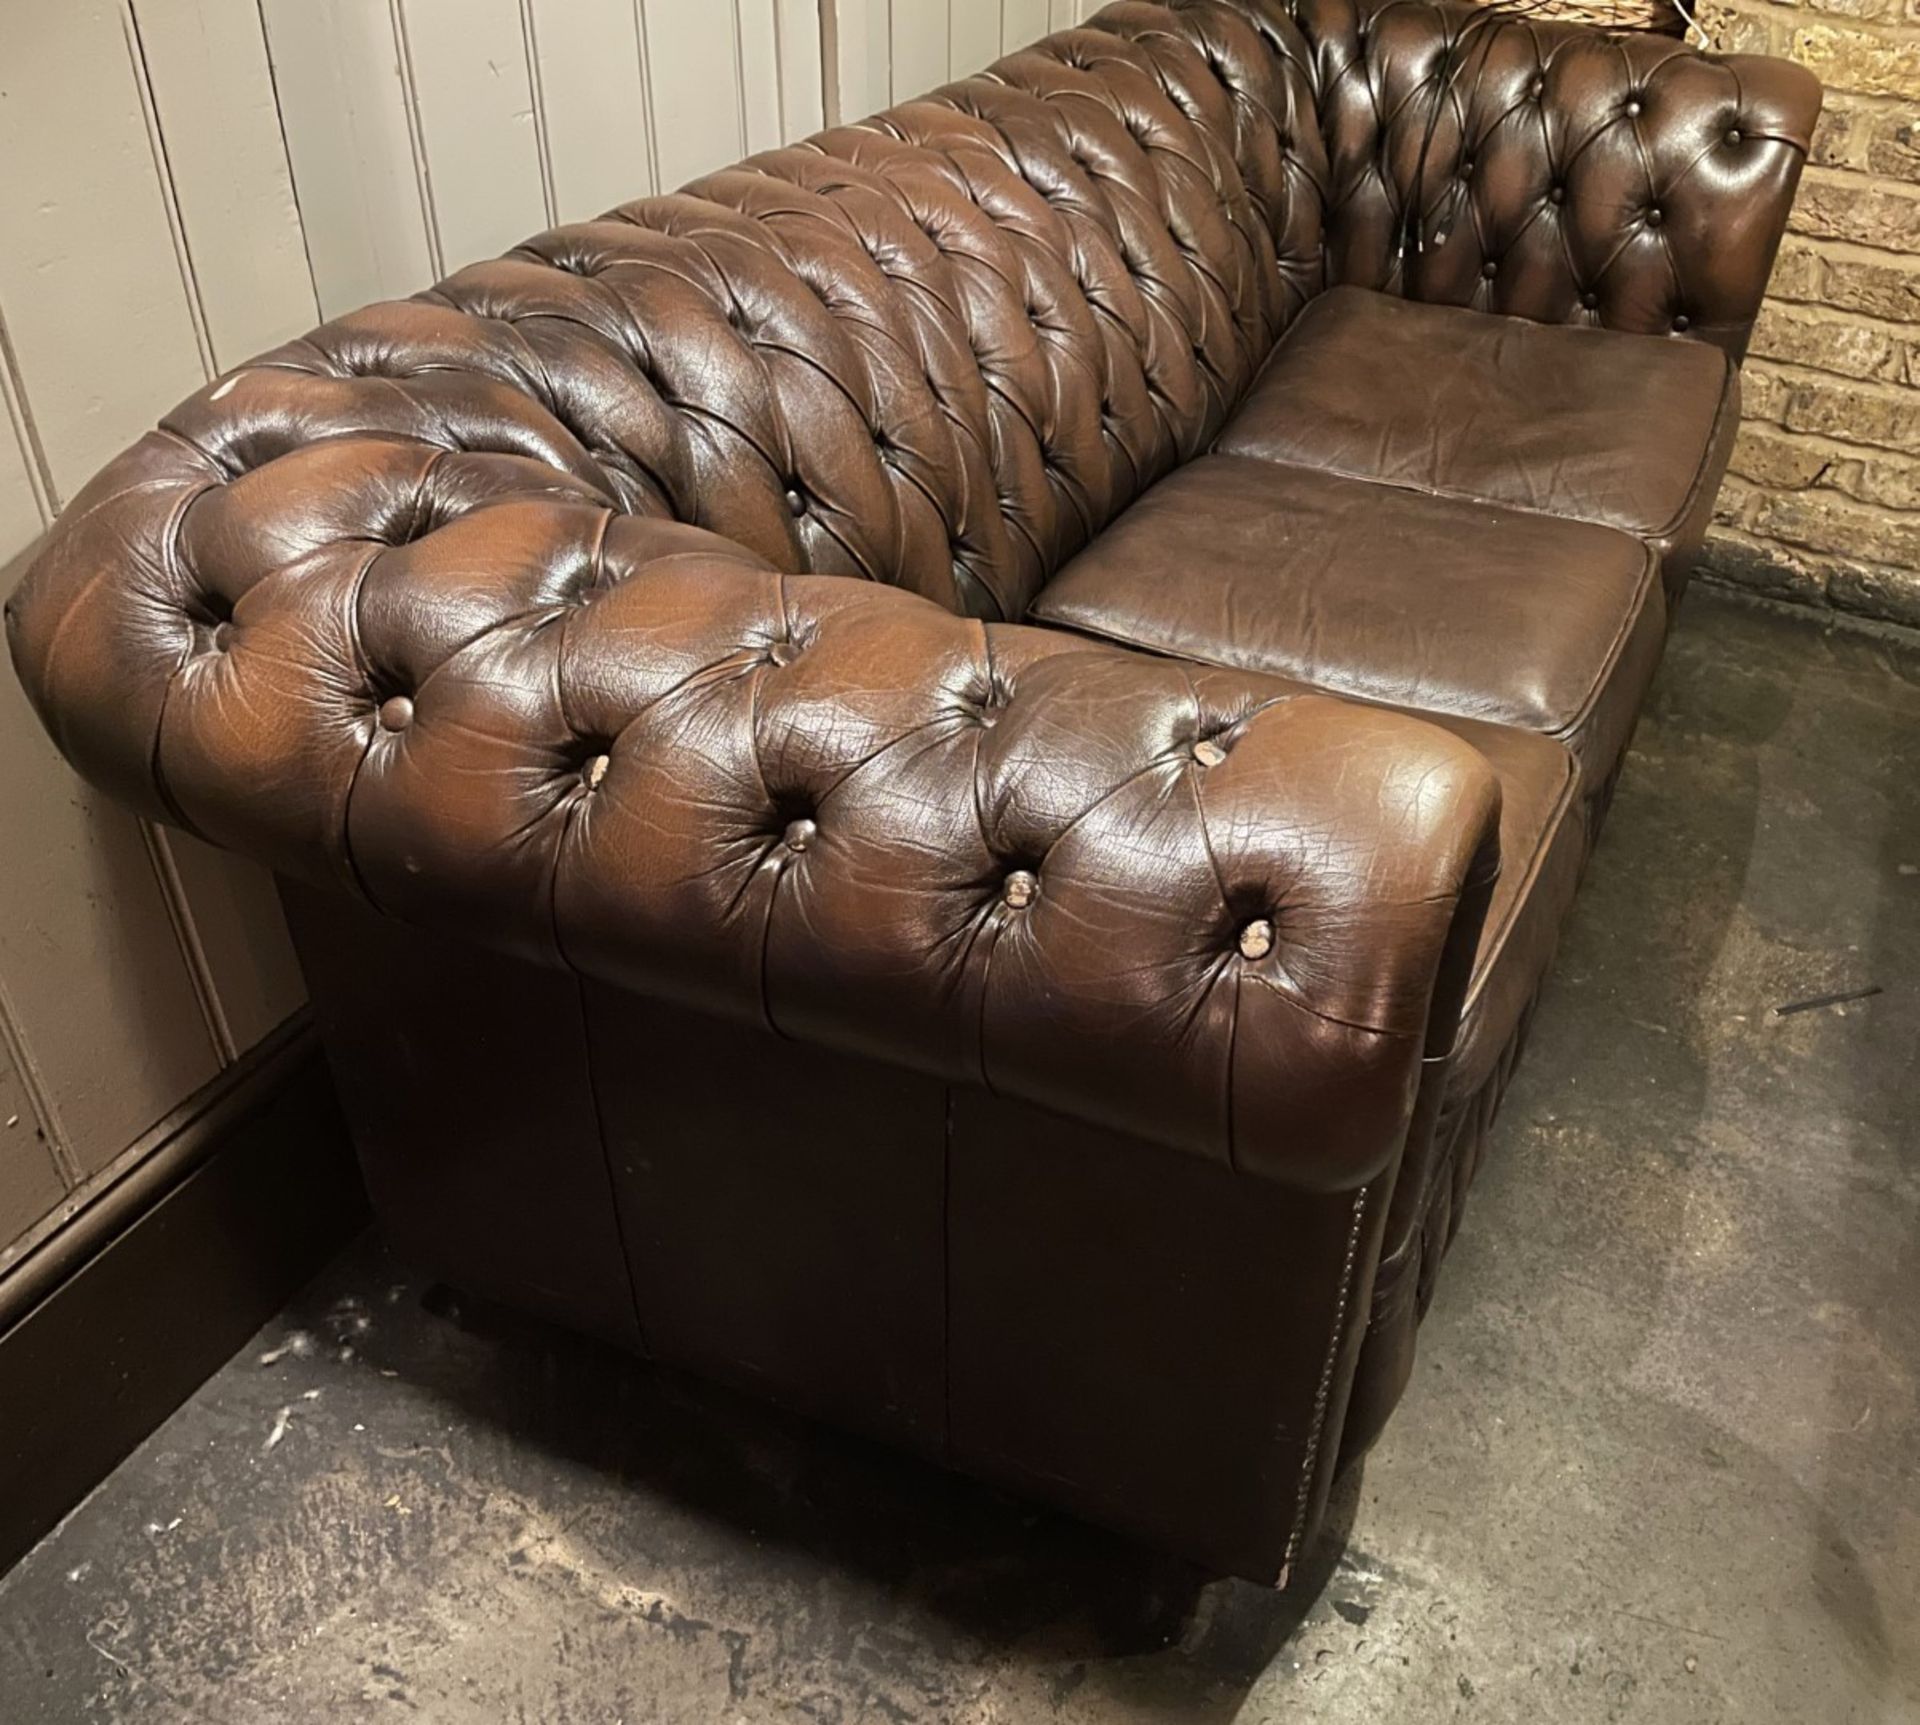 1 x Vintage Premium Handmade Brown Leather Button-back Chesterfield 3-Seater Studded Sofa - Image 6 of 8